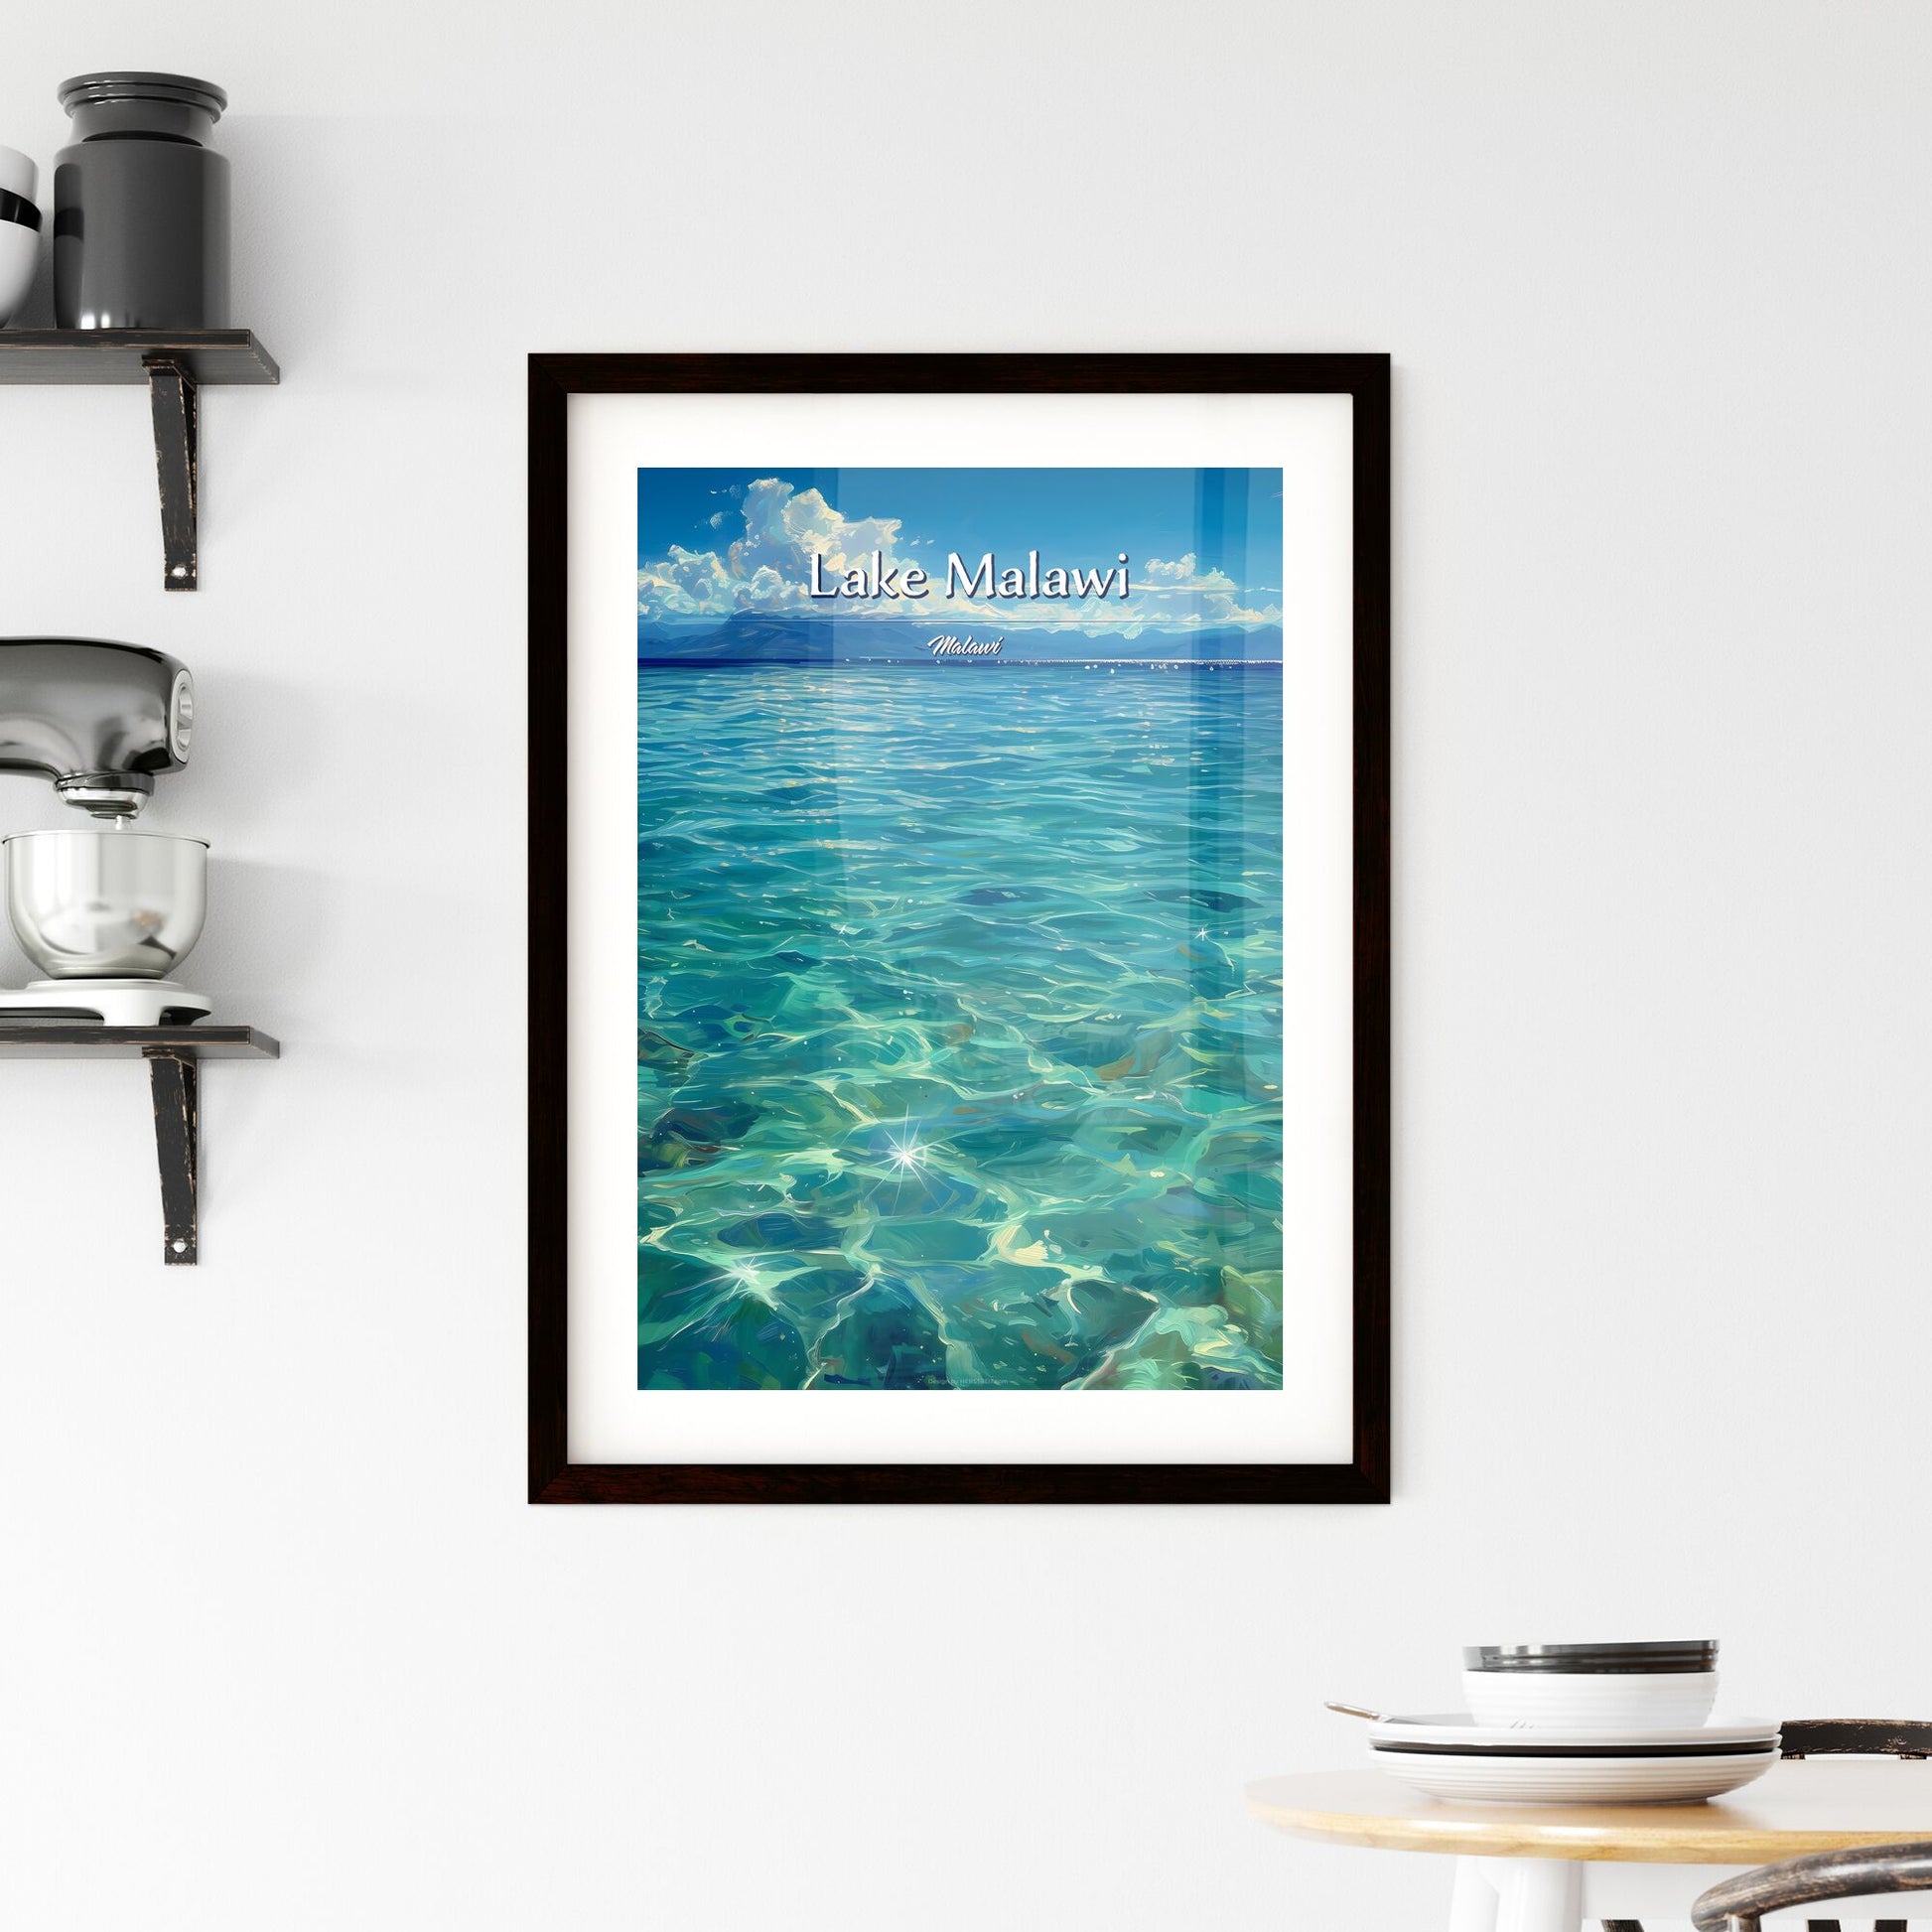 Lake Malawi, Malawi - Art print of a clear blue water with mountains in the background Default Title